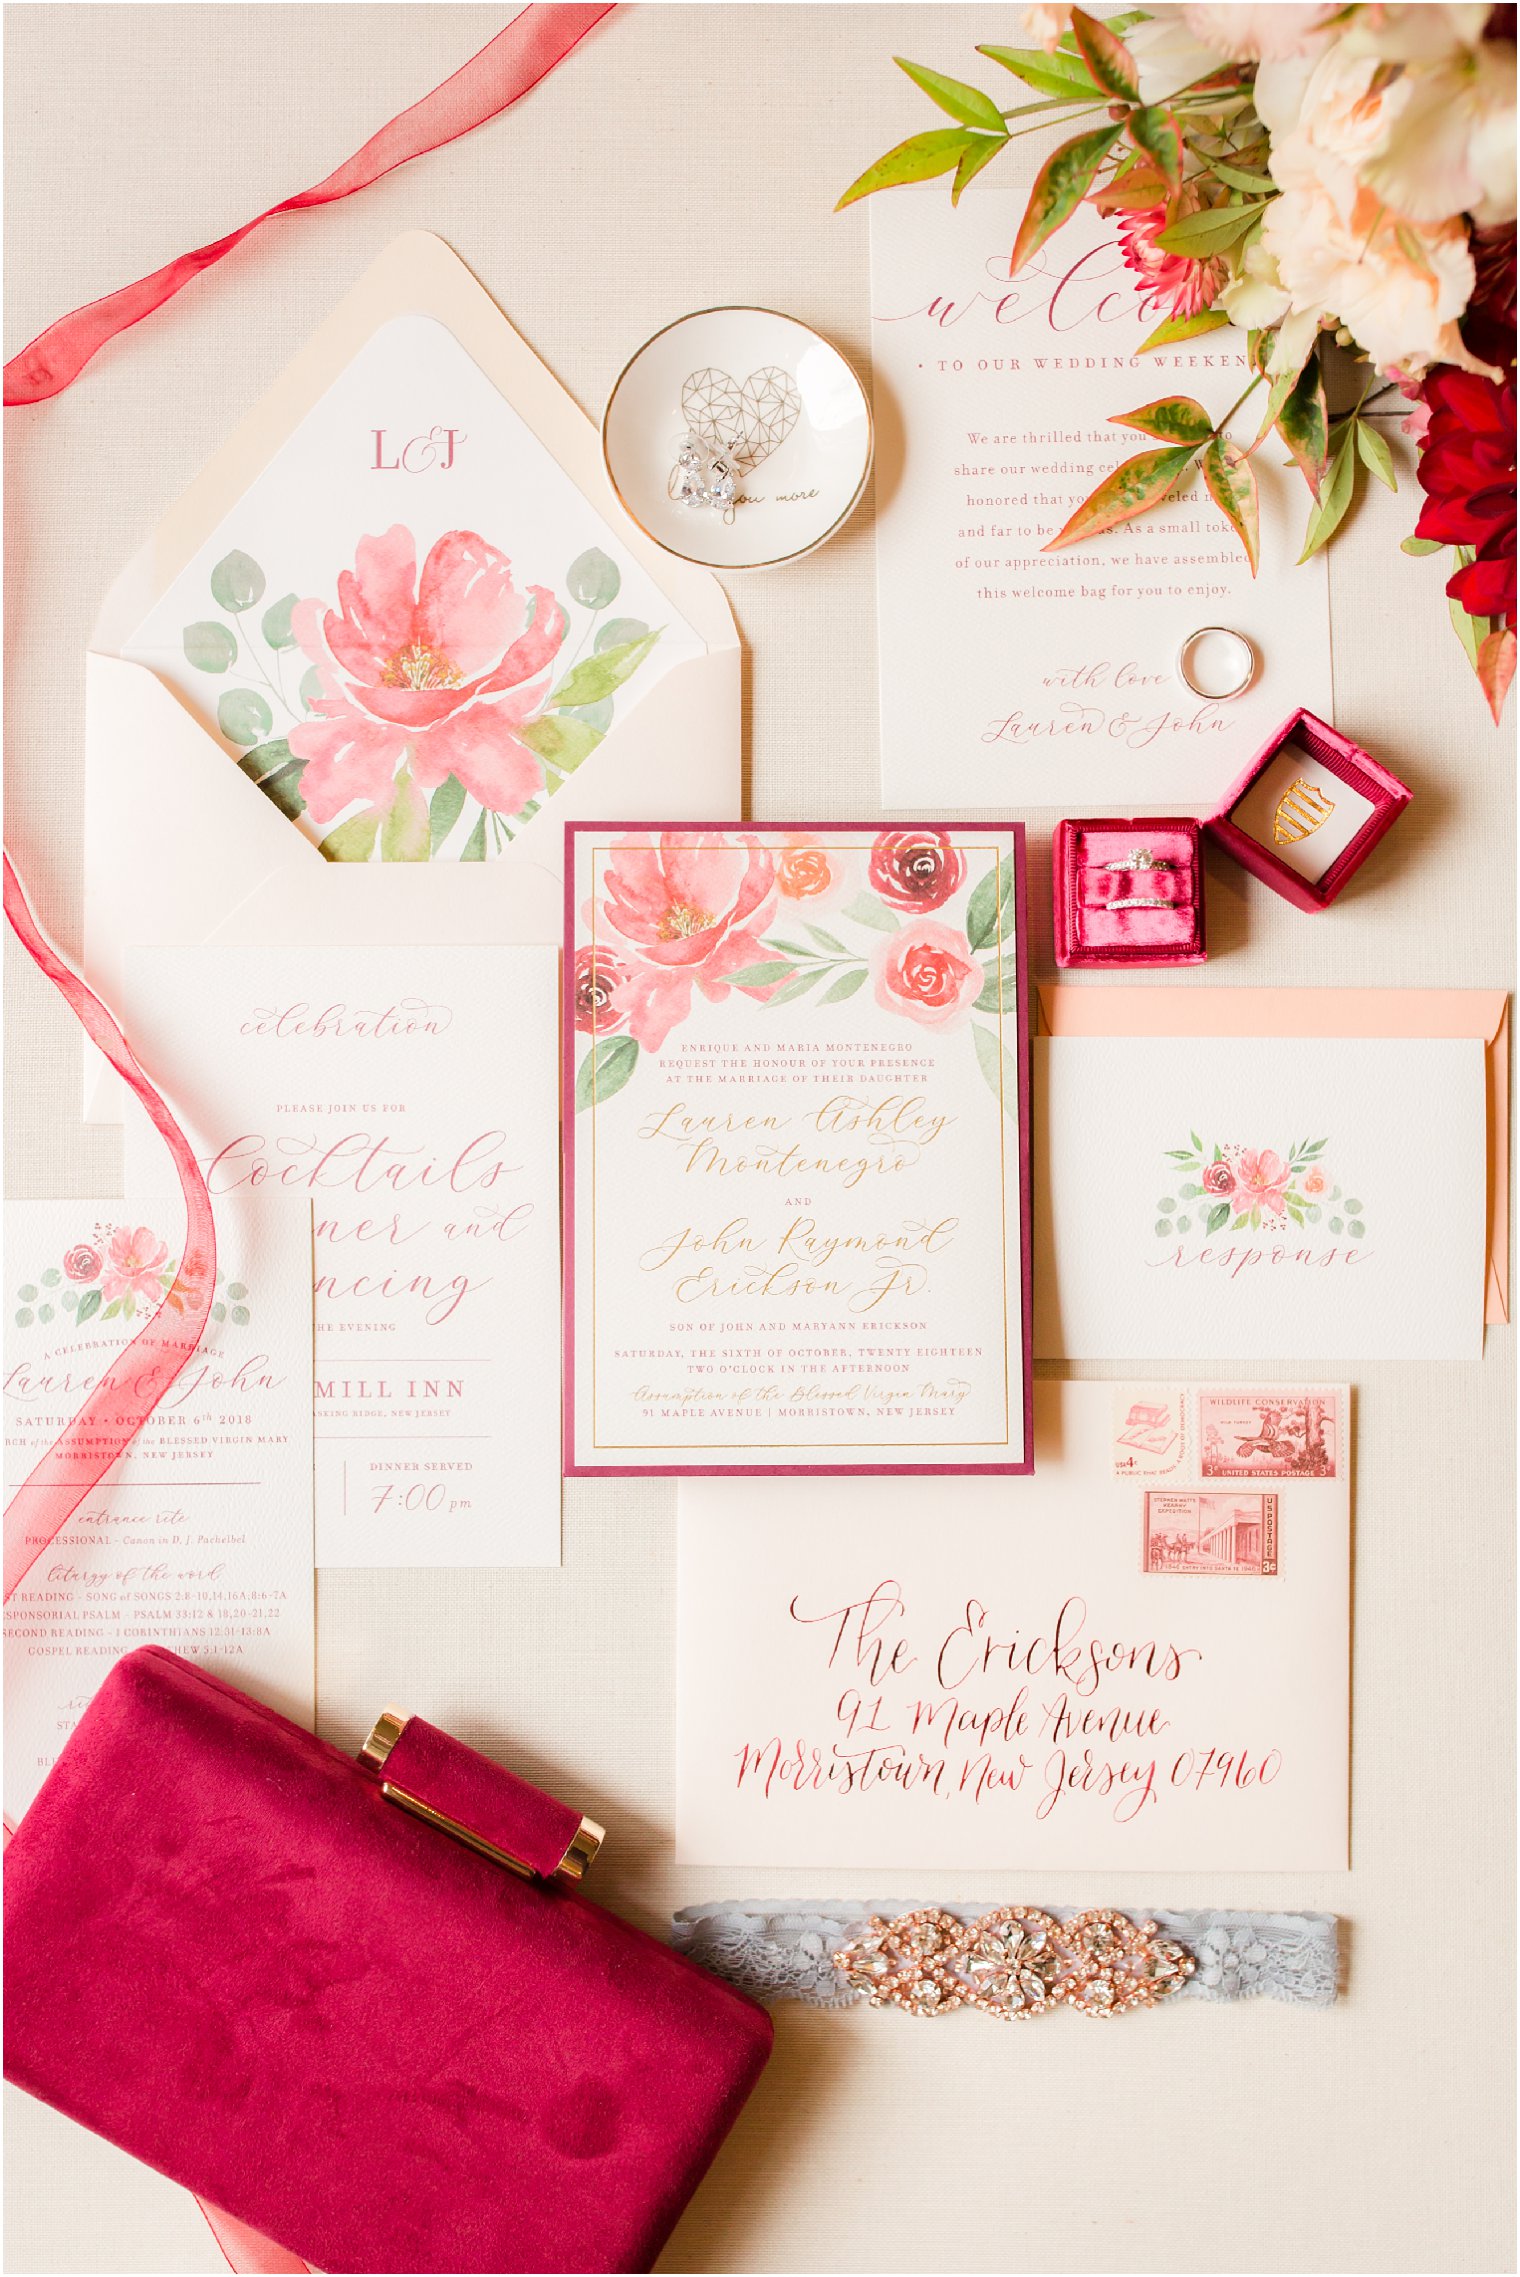 Morris County wedding day invitation suite by Crisp by Britt photographed by Idalia Photography